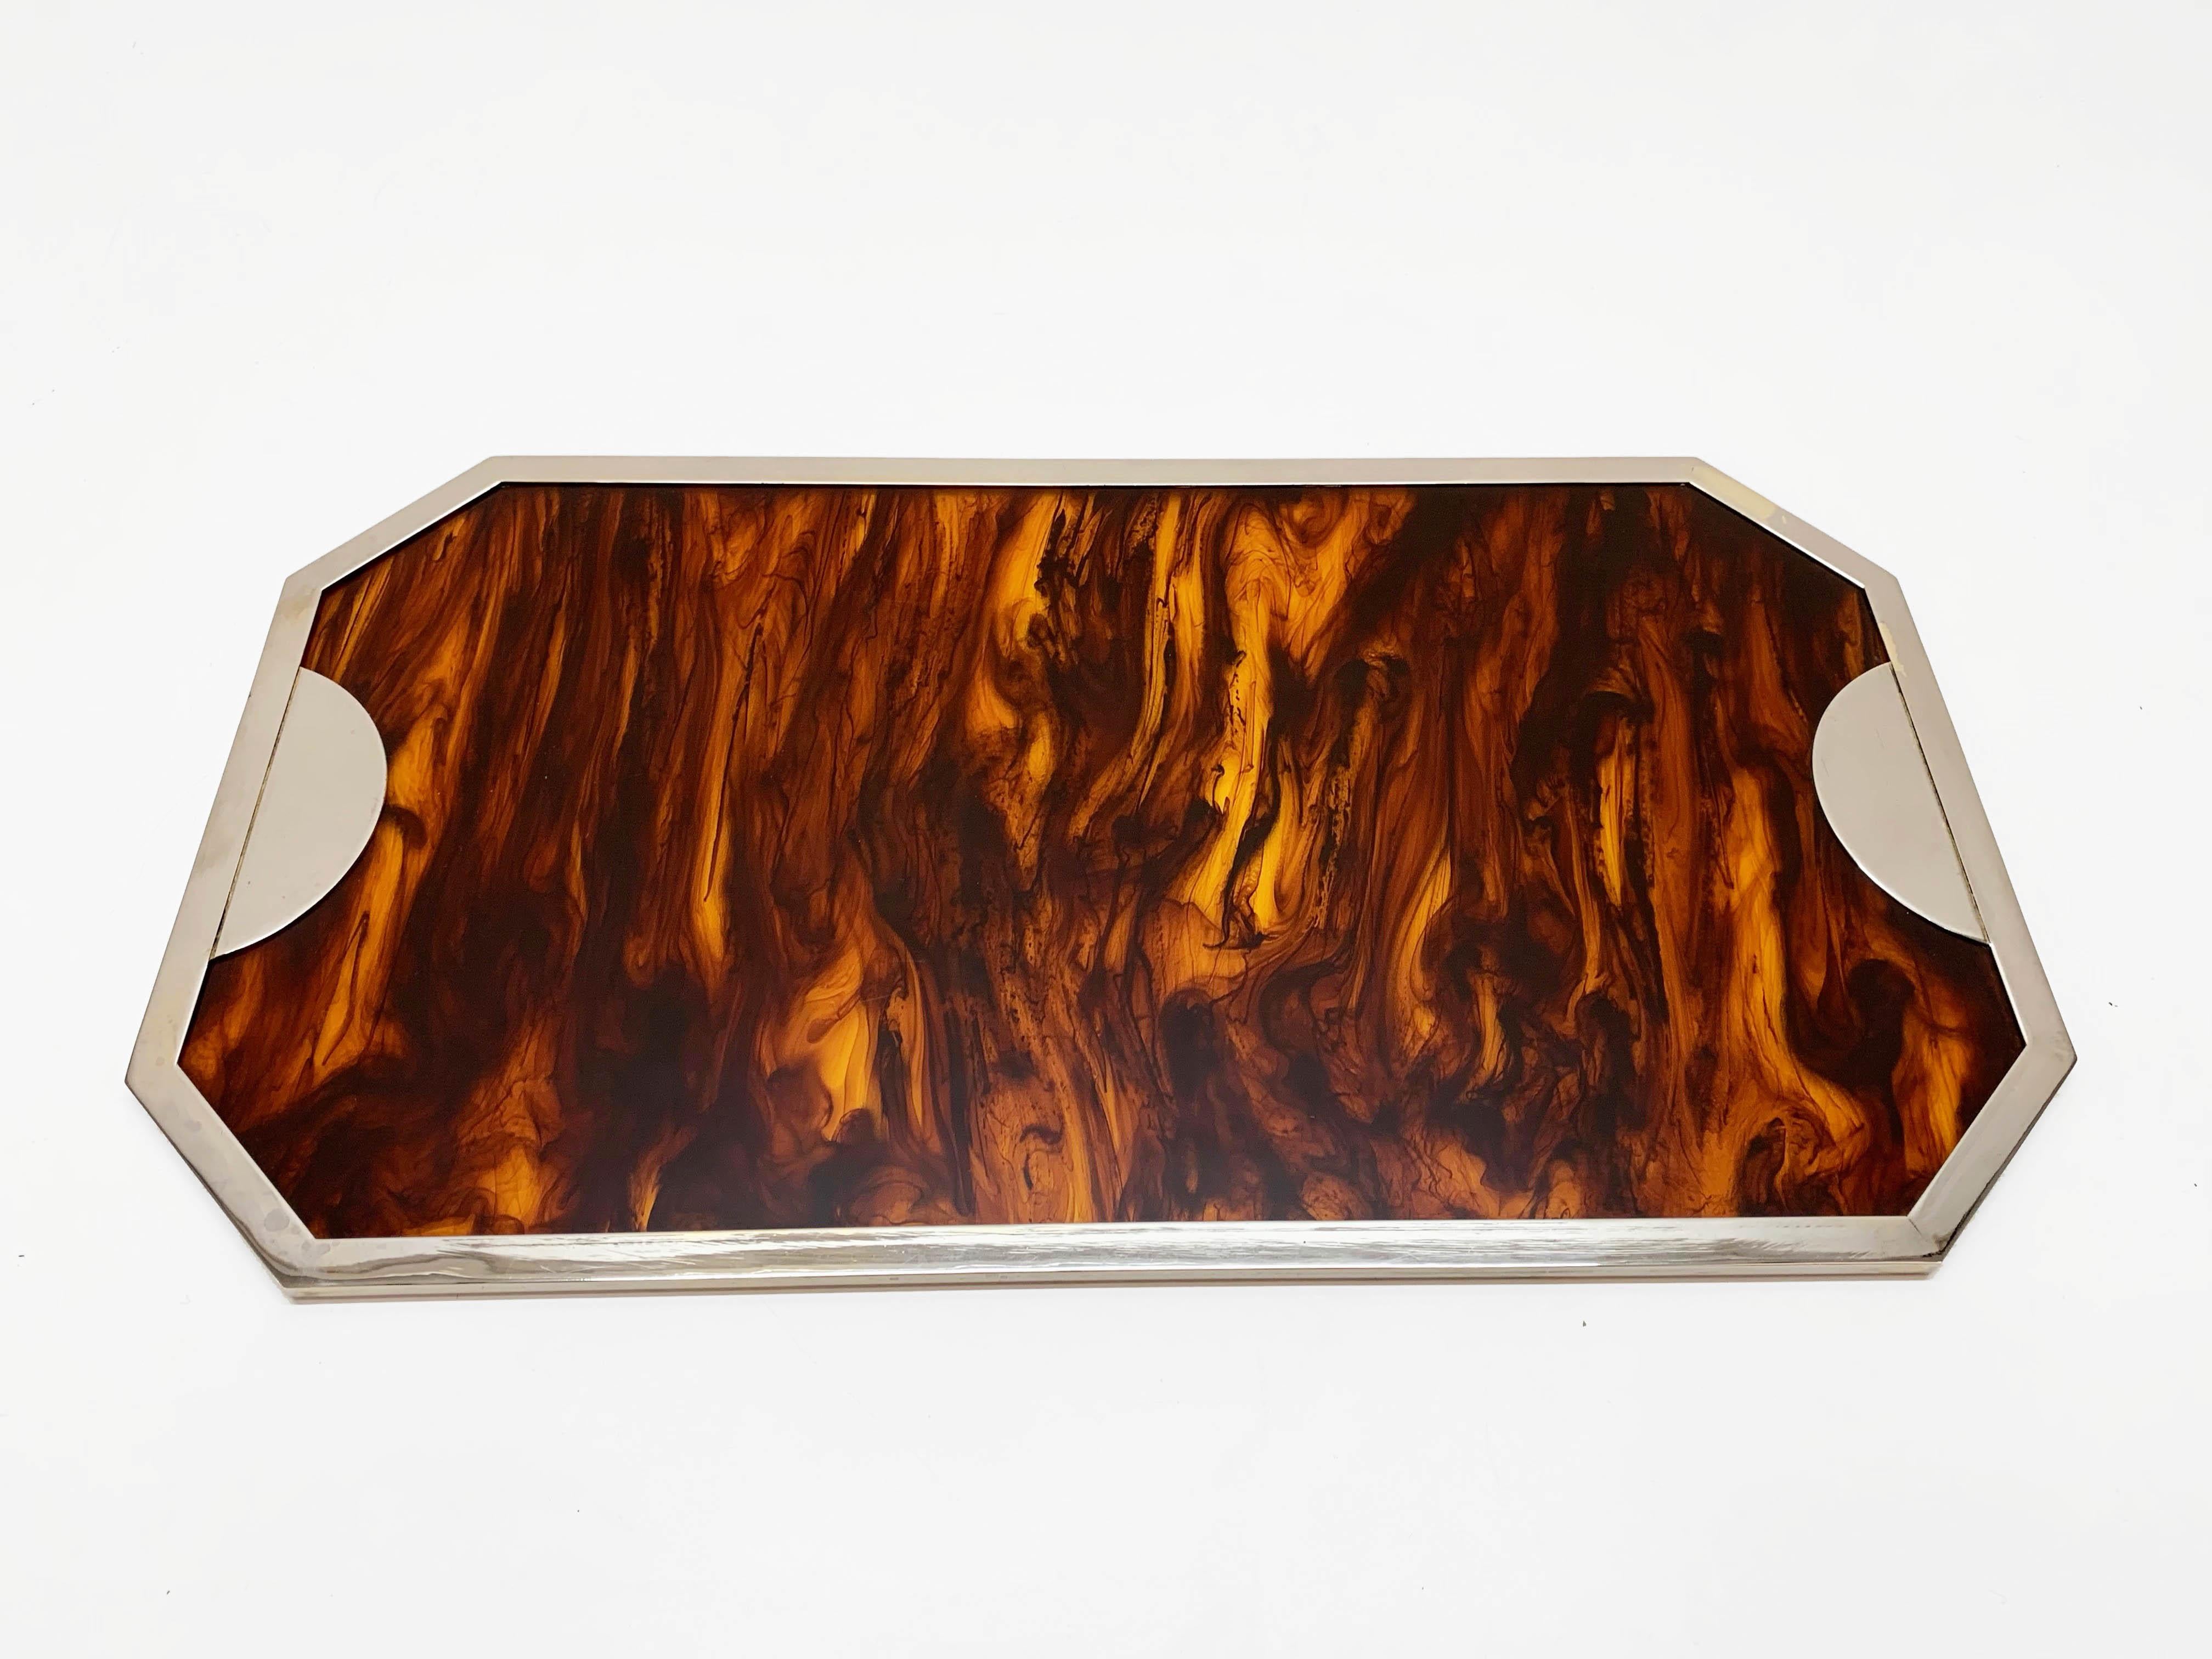 Wonderful midcentury serving tray in Lucite, simulating a turtle effect. This fantastic piece was made in Italy in the 1970s and its design is attributed to Willy Rizzo for a Christian Dior production.

It is an iconic tray or serving plate with